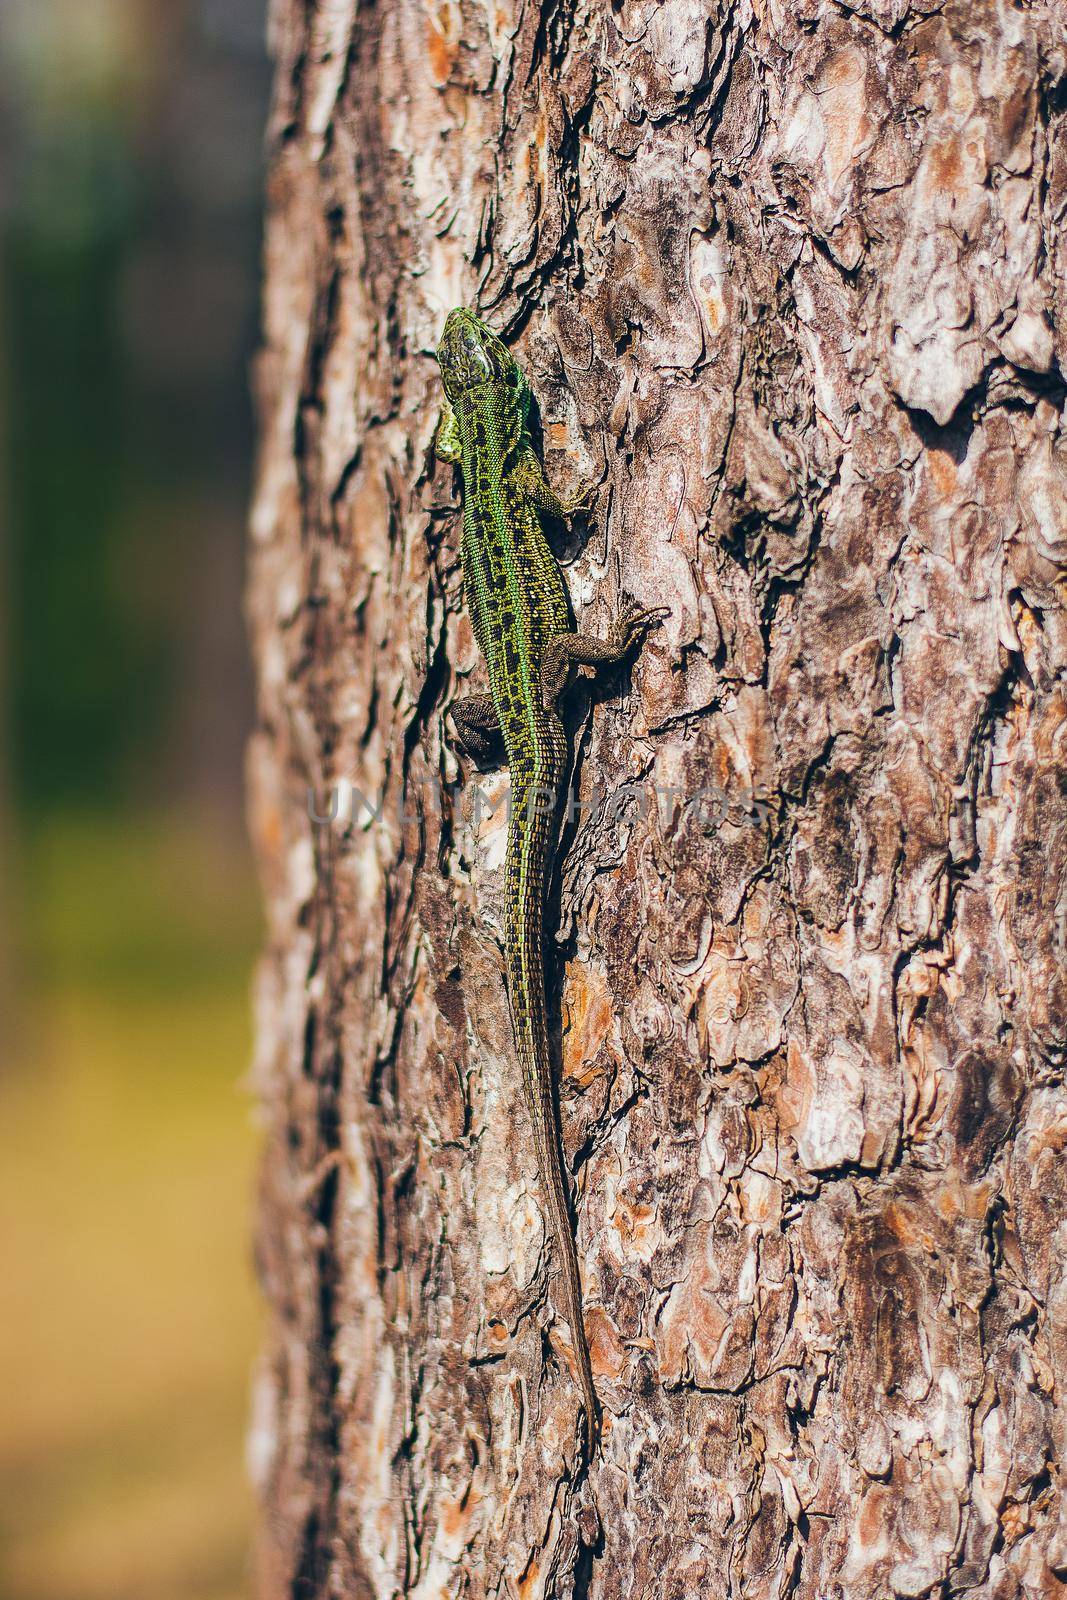 Large green bright lizard on a tree close-up macro, forest fauna.